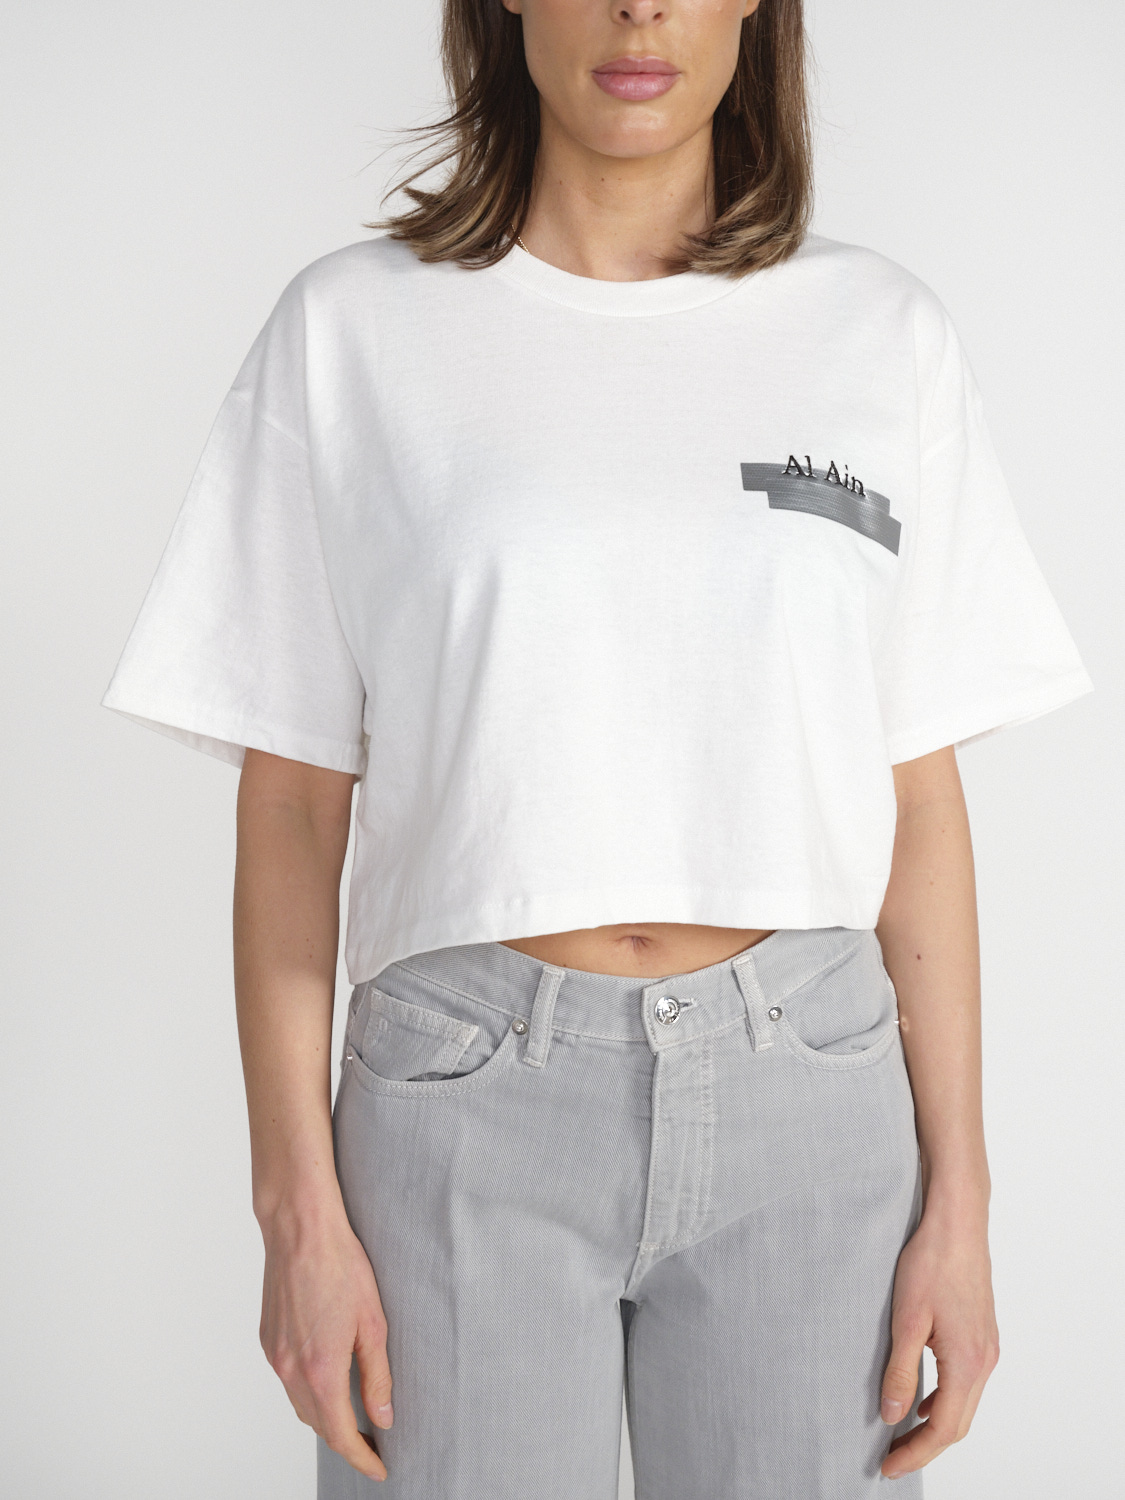 Al Ain Cropped T-Shirt mit Muster  blanco S/M